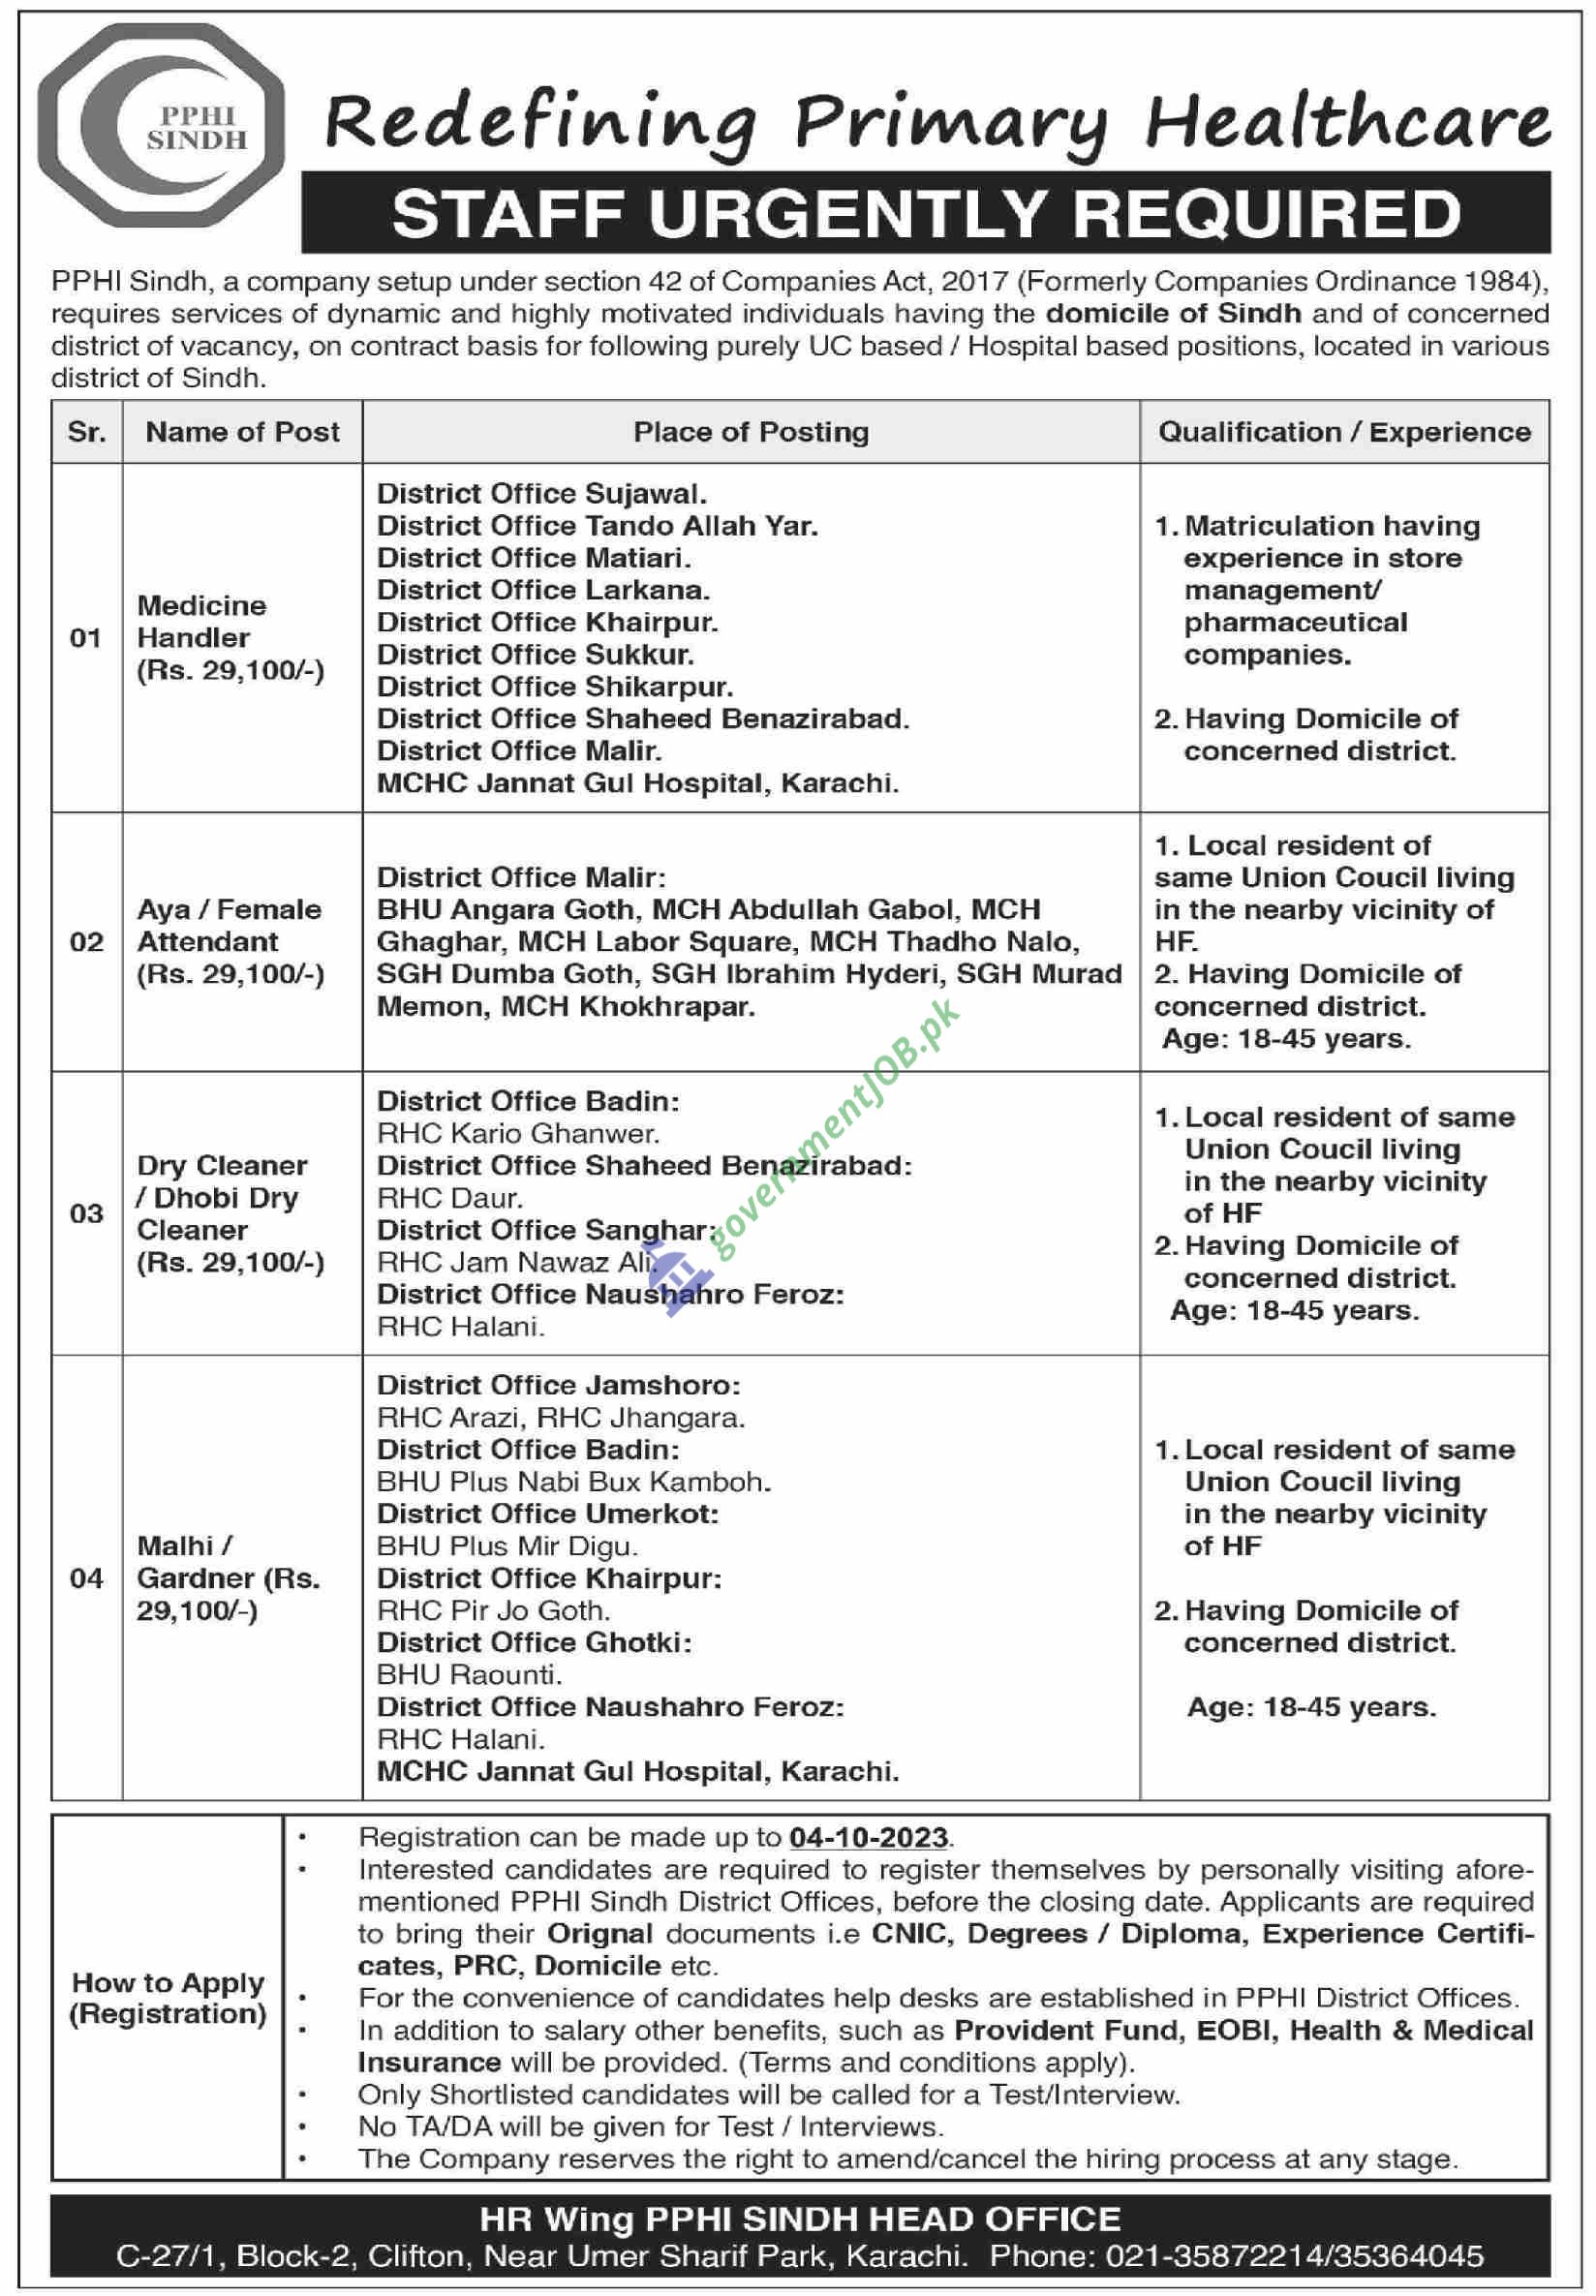 Redefining primary Healthcare (PPHI) Sindh Jobs 2023 - pphisindh.org